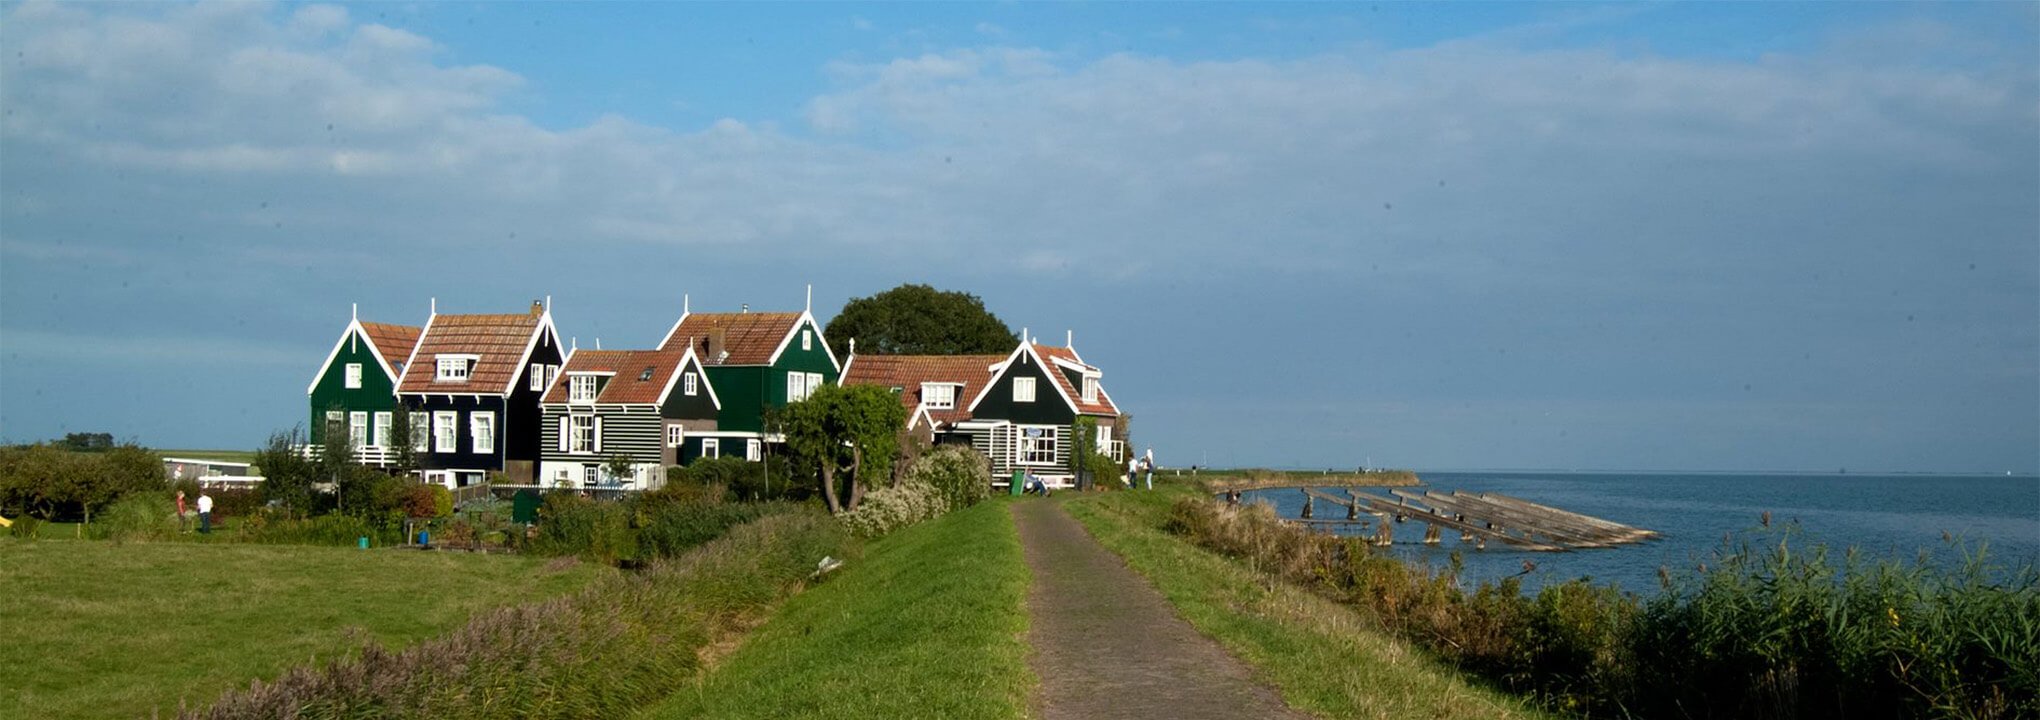 Polder-Waterland
country side tour